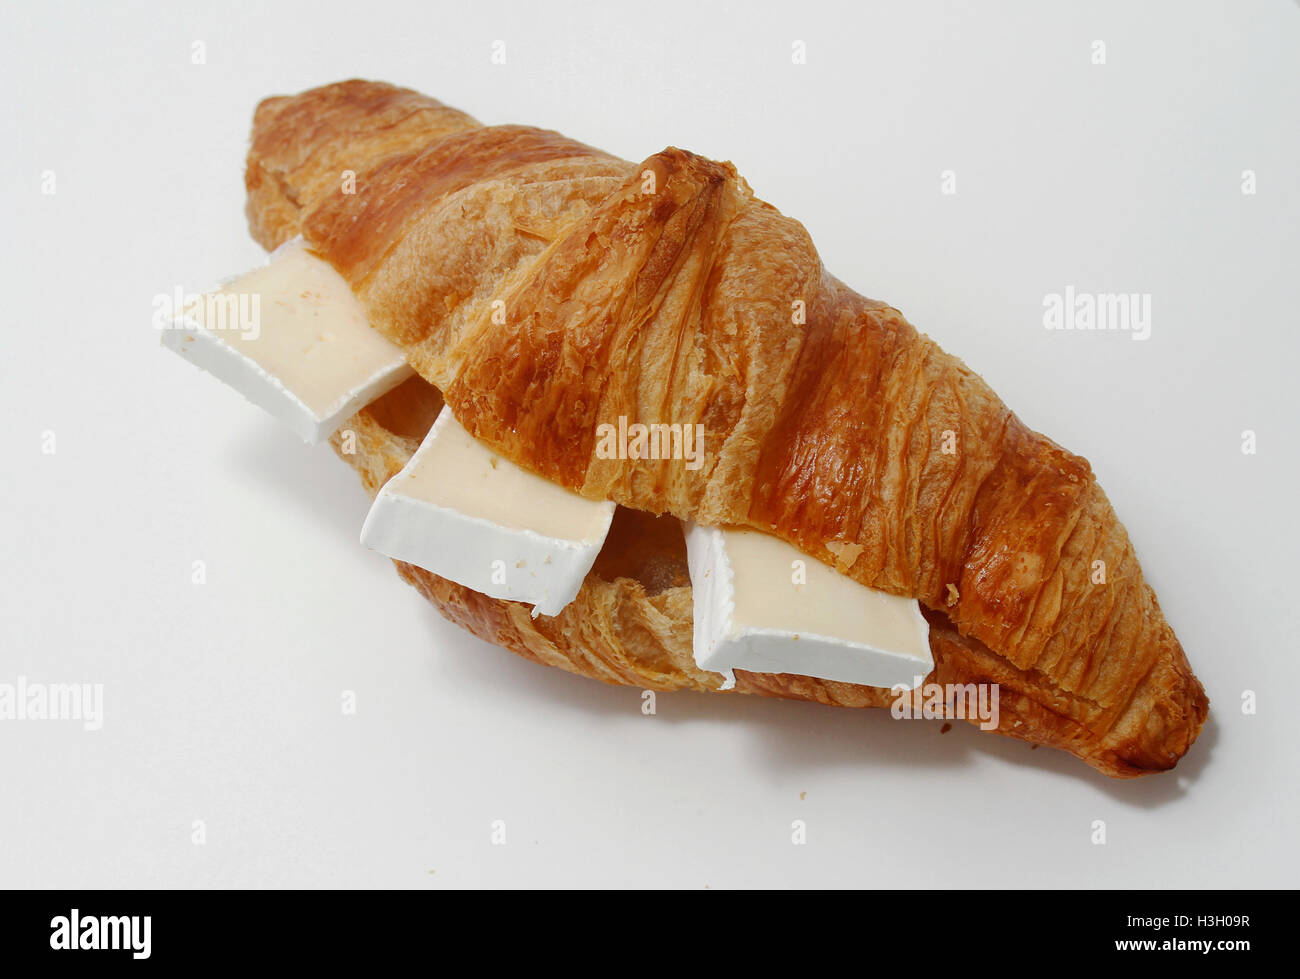 Fresh croissant with three slices of brie cheese. Stock Photo